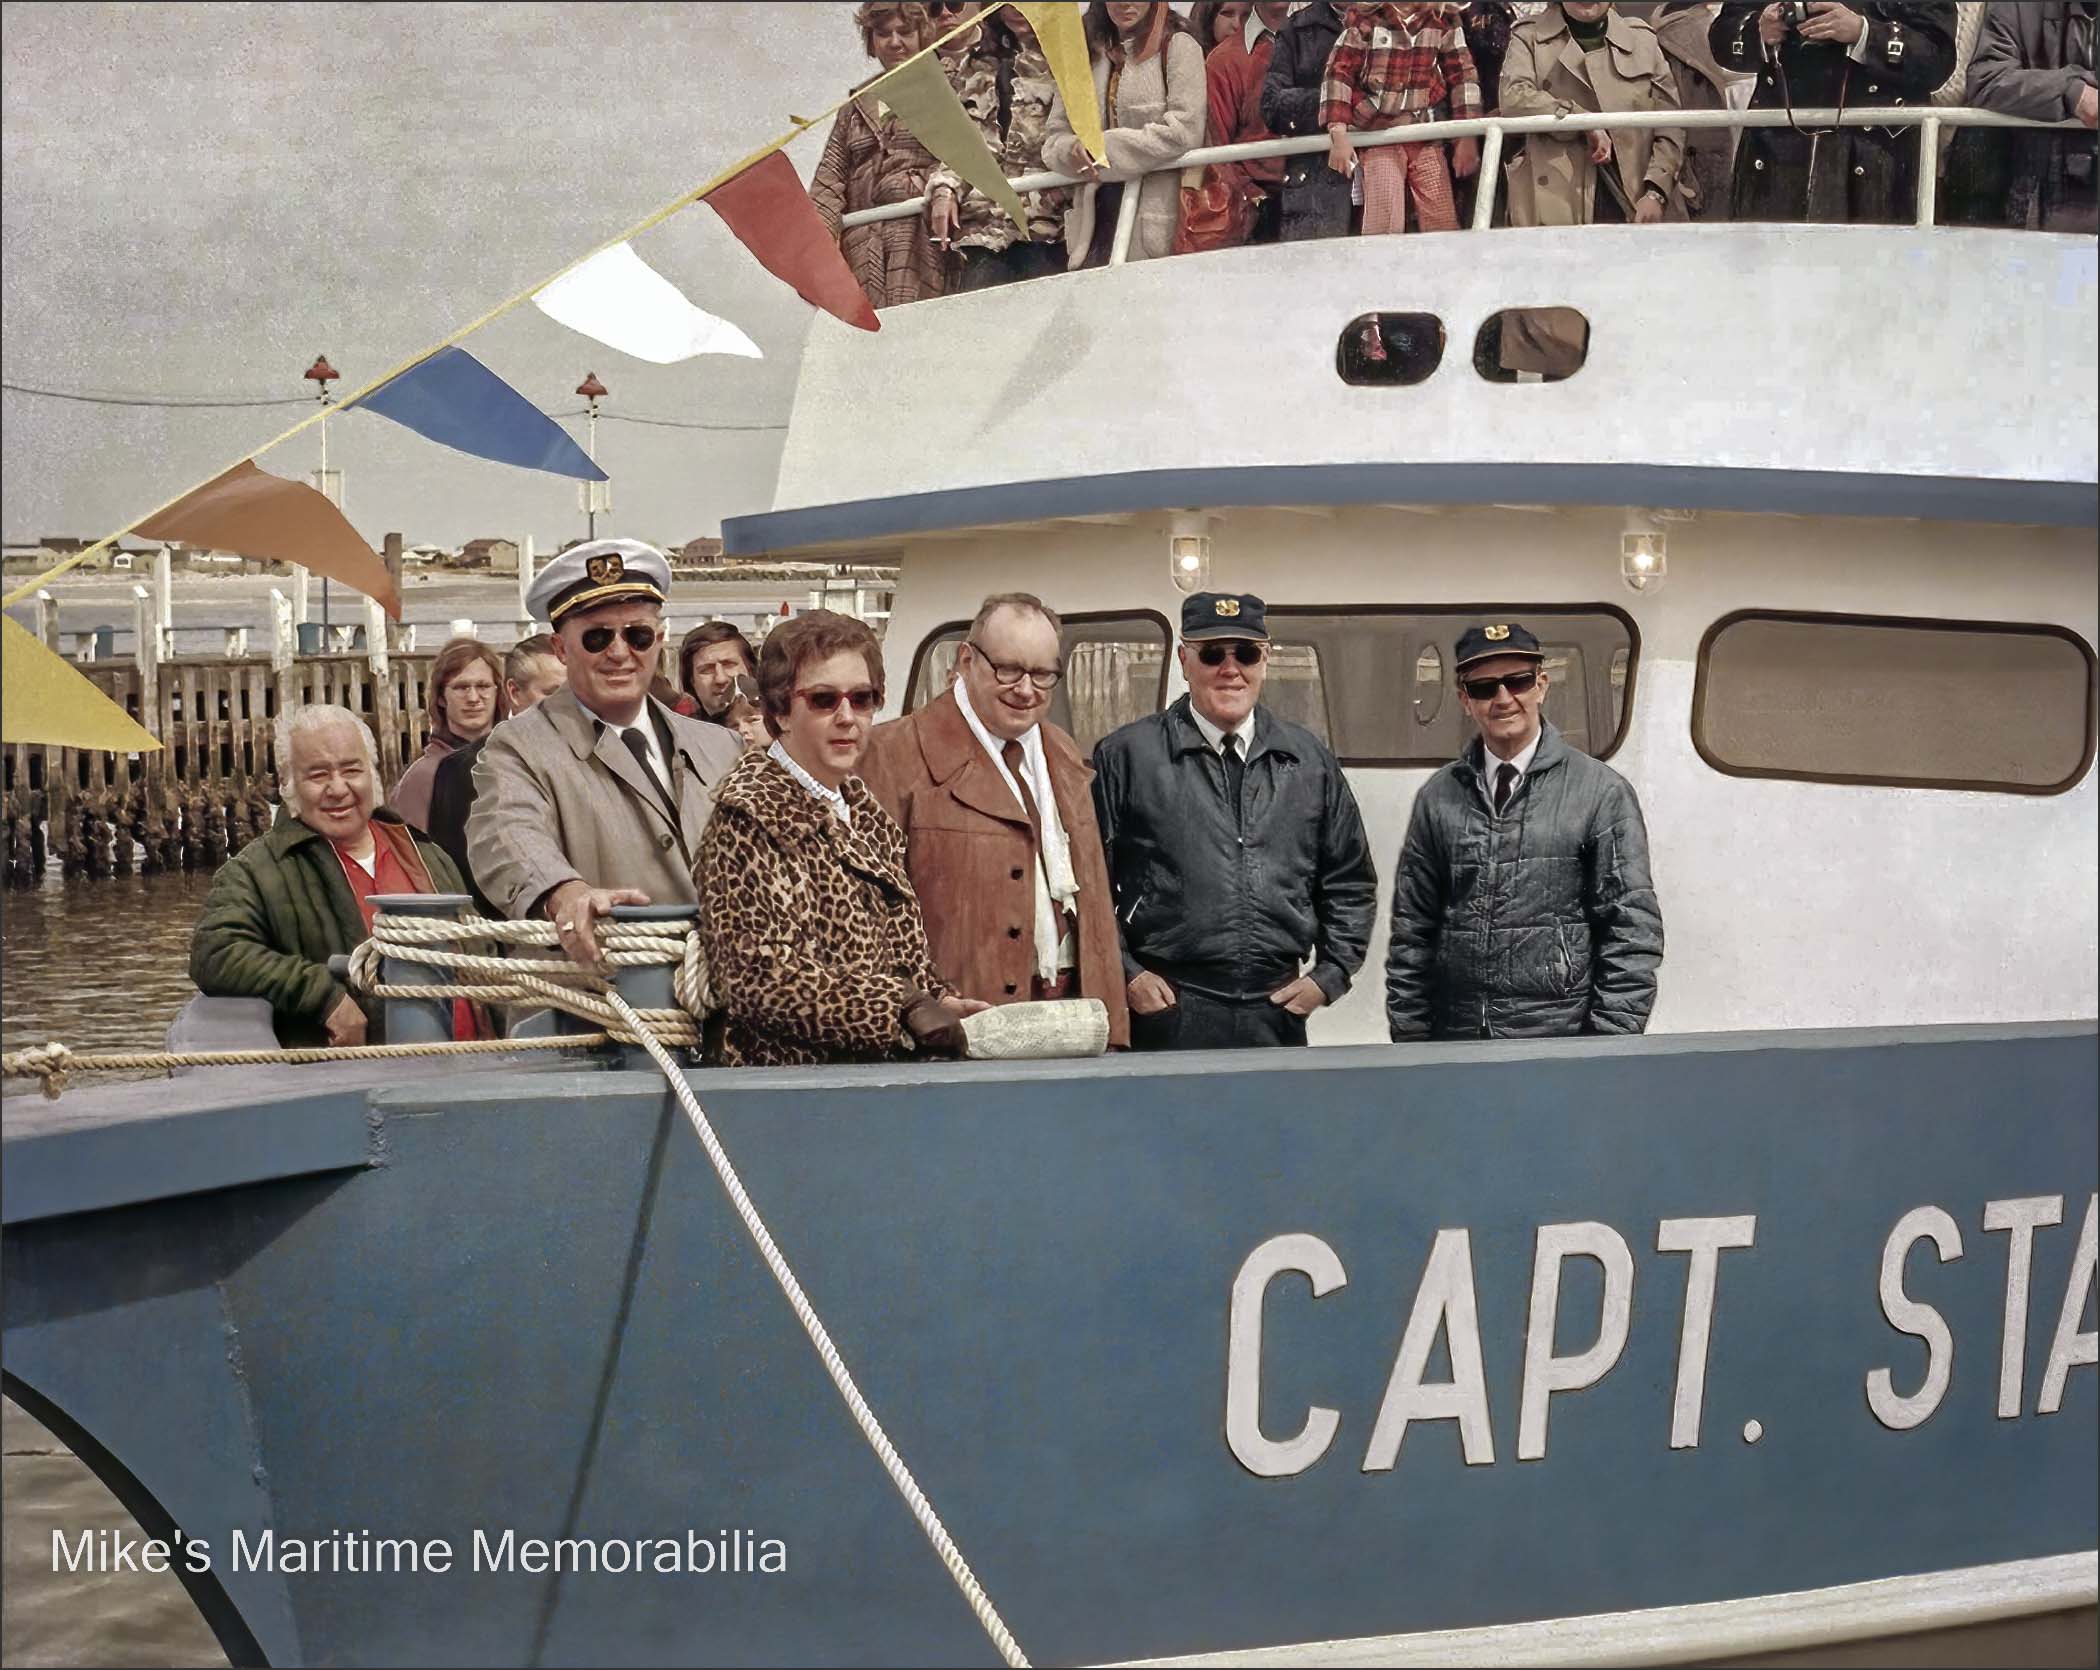 Christening of the CAPT. STARN VI, Atlantic City, NJ – 1975 The "CAPT. STARN VI" christening in March 1975 at Atlantic City, NJ. Standing in the bow with the white captain's hat is Captain Clarence "Skeetz" Apel and to his right, his wife Barbara. Further to the right are Starn's Manager, George Crook and Captain Burt Whitaker. The photo is courtesy of Ann Apel Eble.